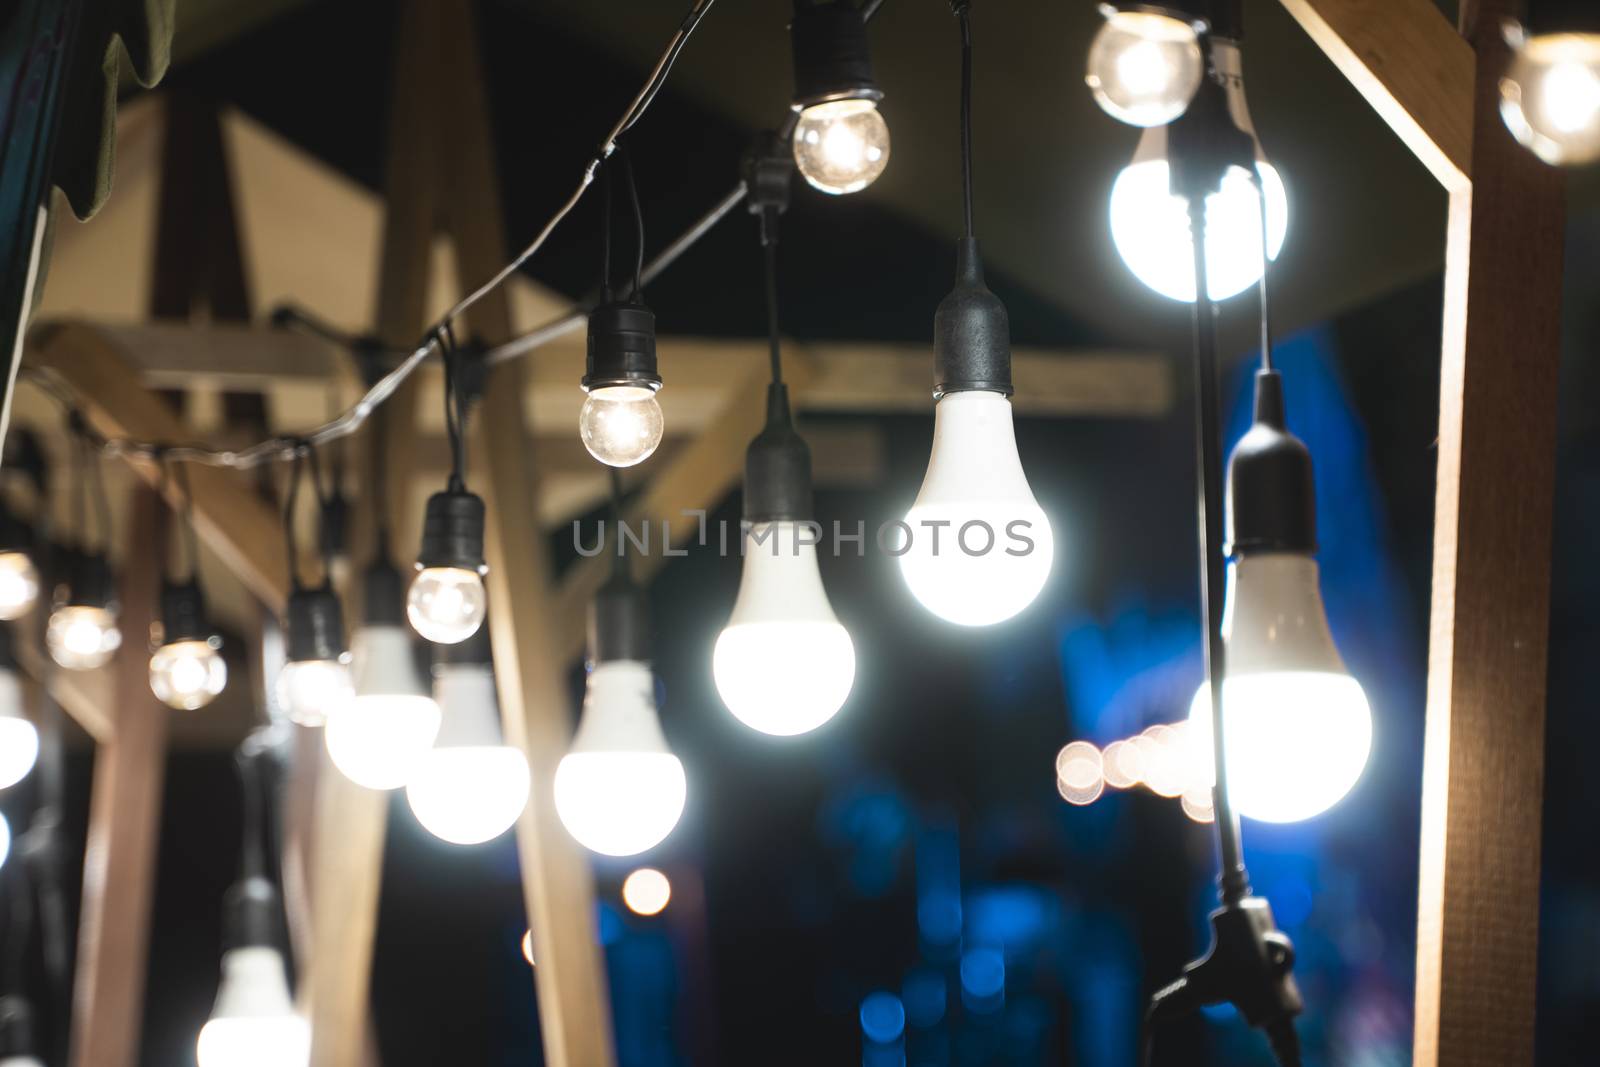 Decorative outdoor string lights in the evening. by vovsht